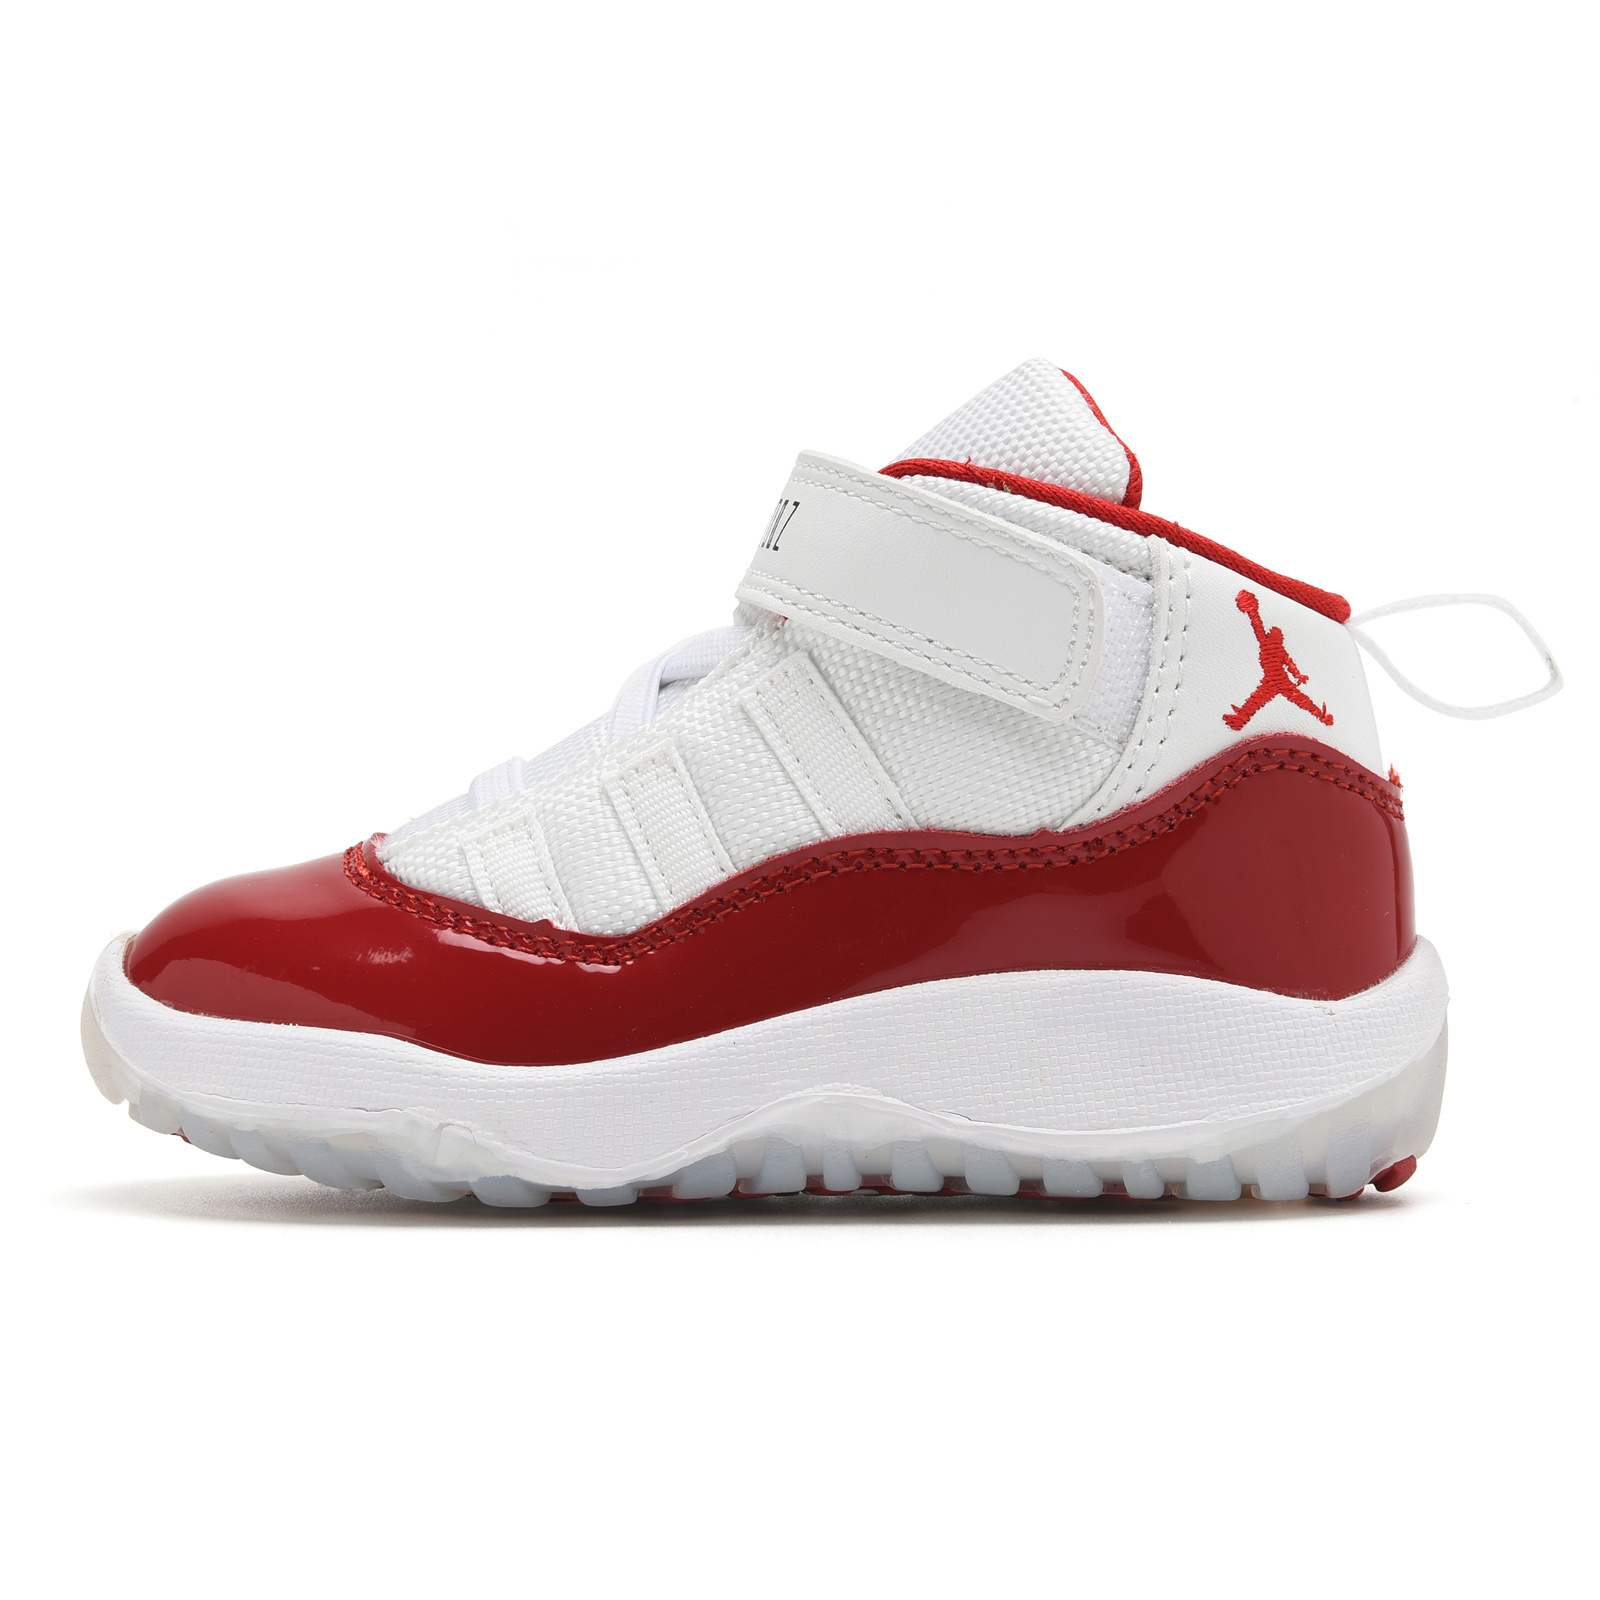 Youth Running Weapon Air Jordan 11 White/Red Shoes 022